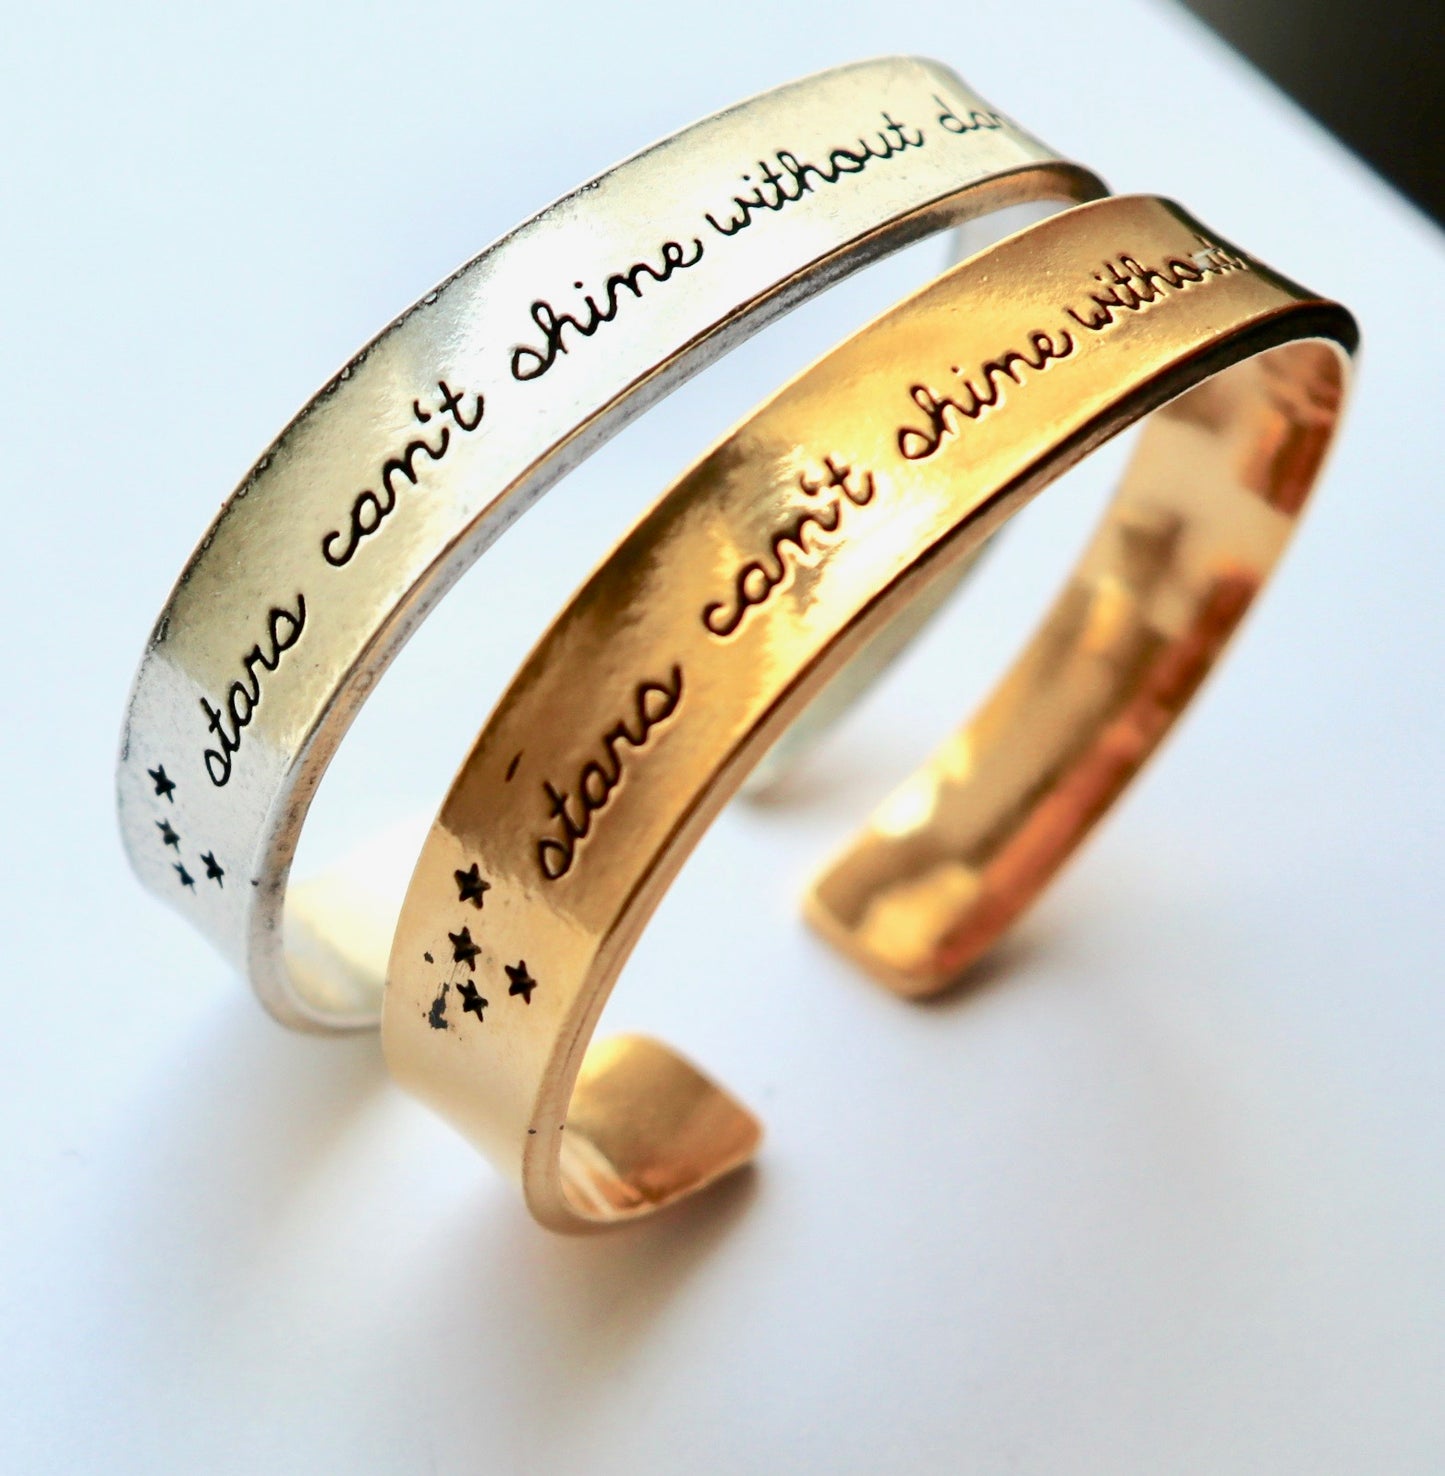 Stars Can't Shine Without Darkness Hand Stamped Cuff Bracelet